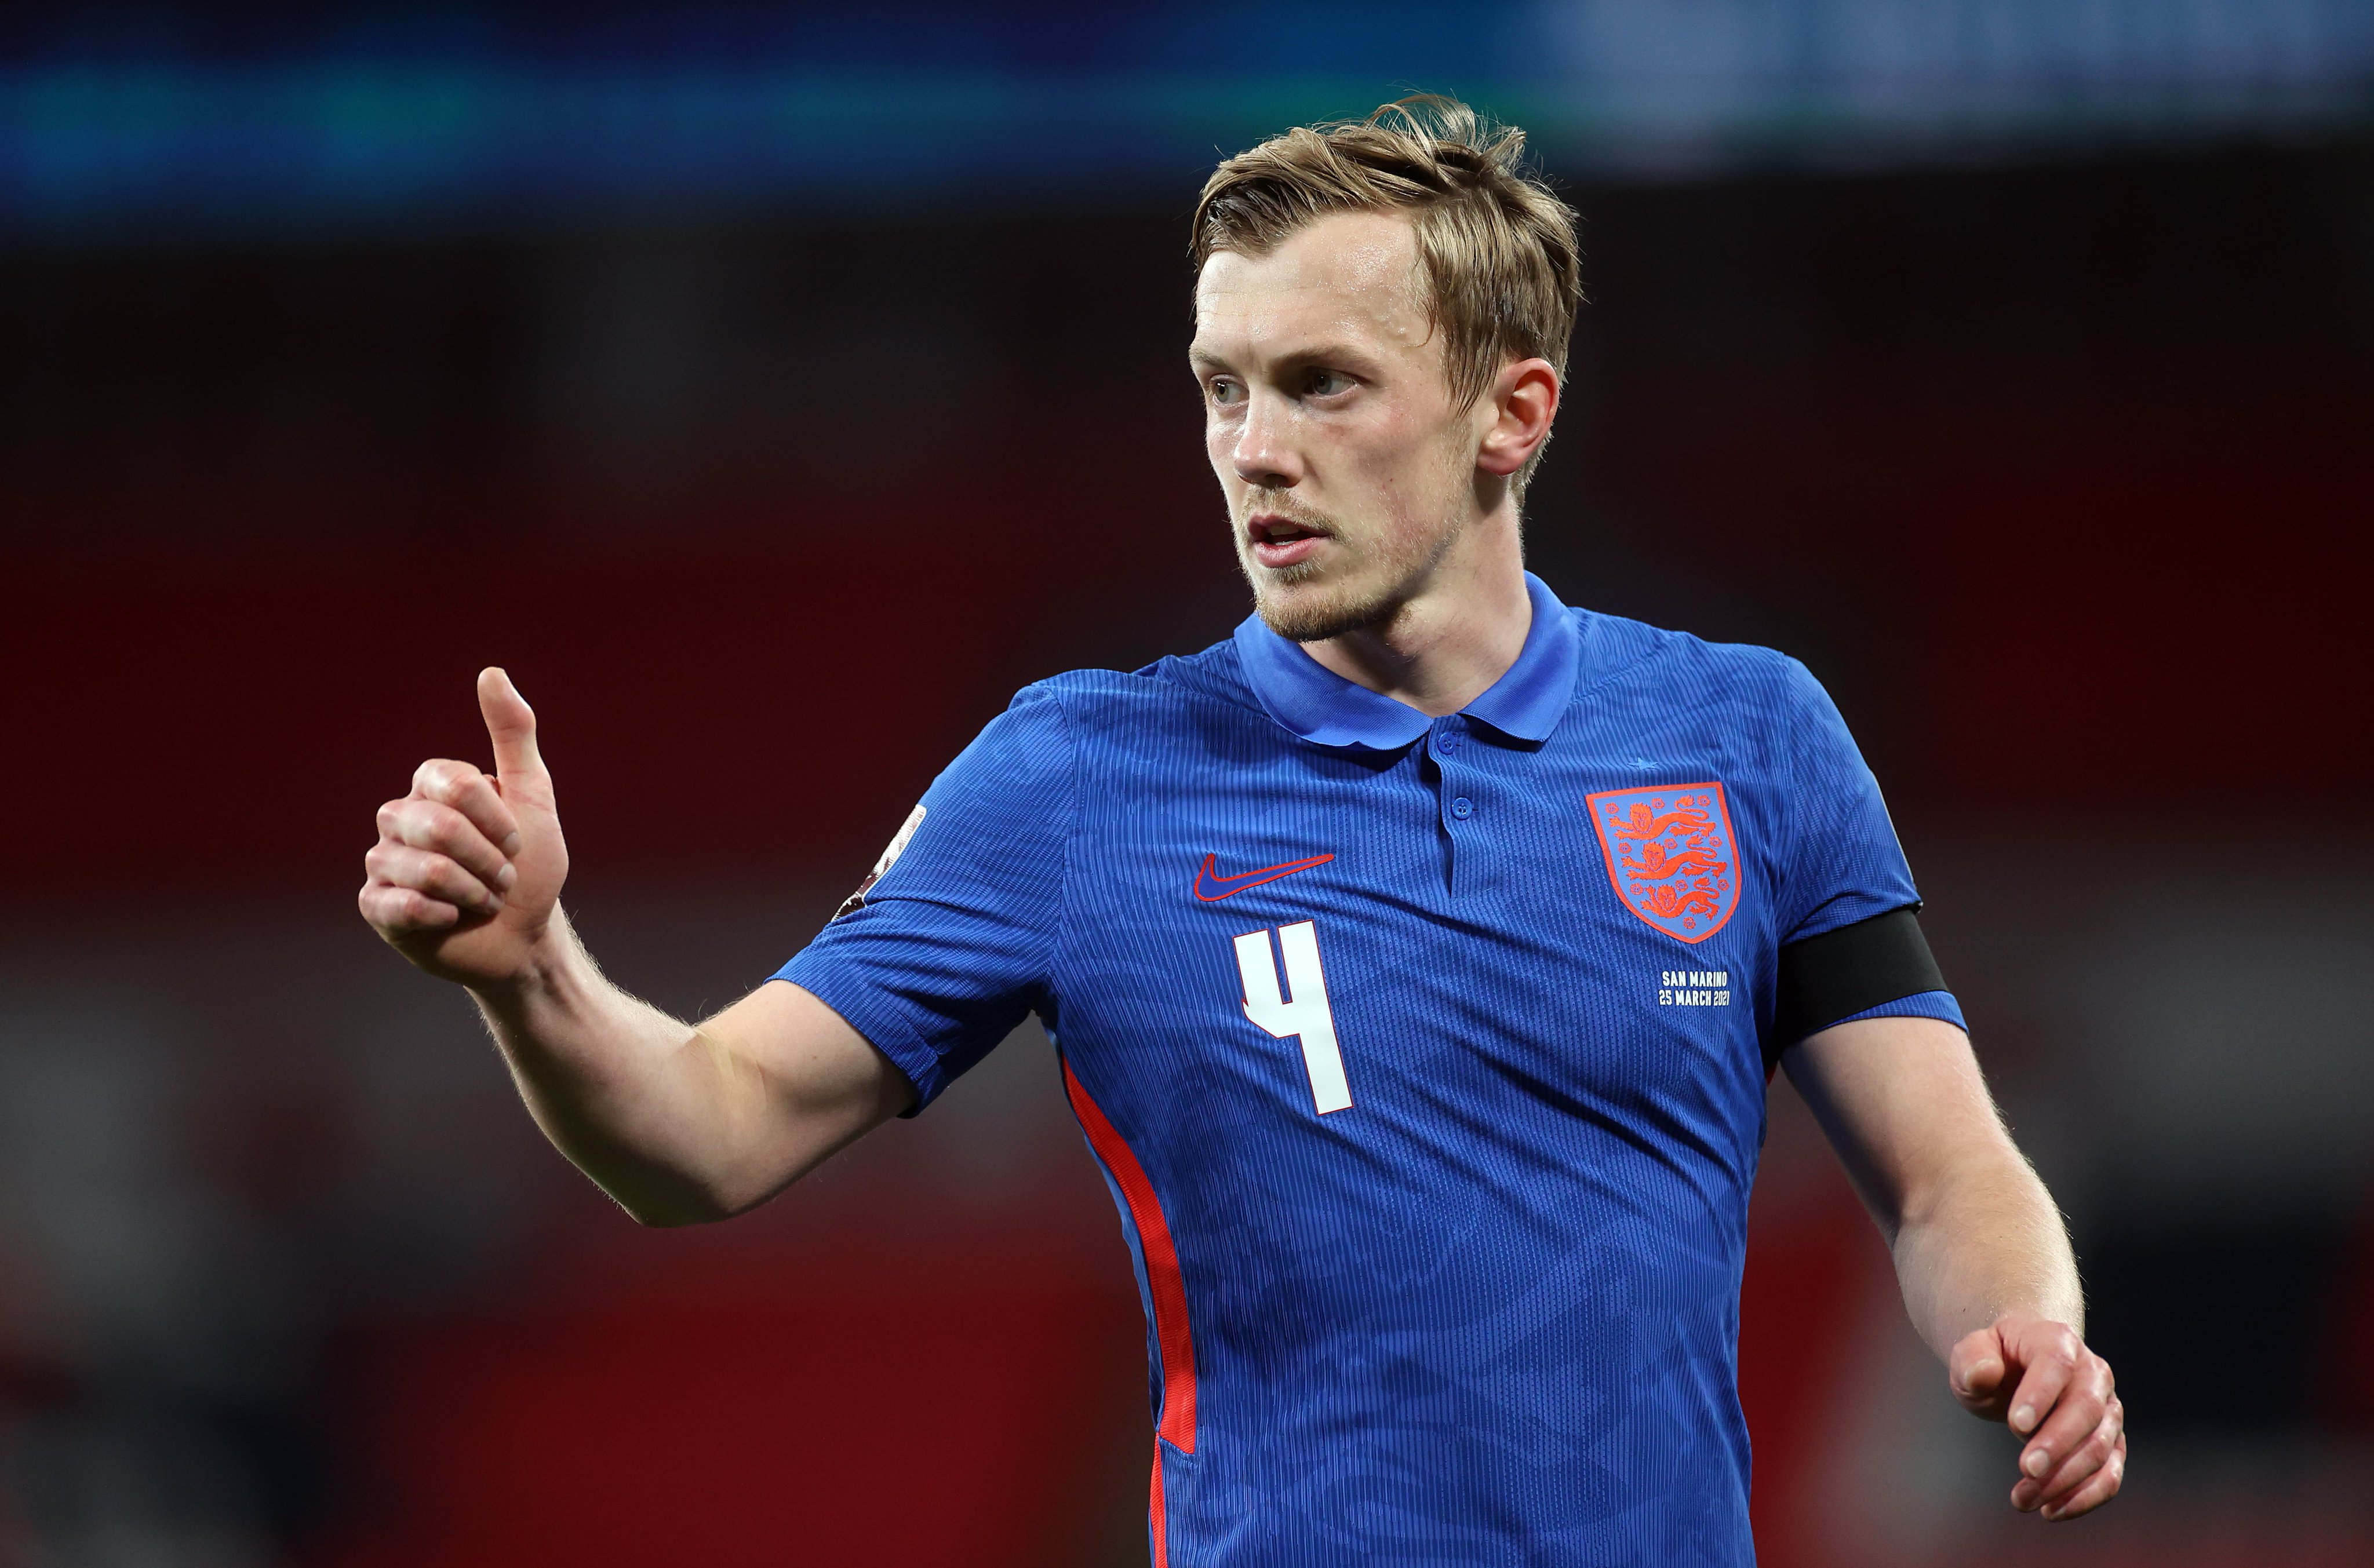 Was excited for team but equally gutted on not being there, reveals James Ward-Prowse